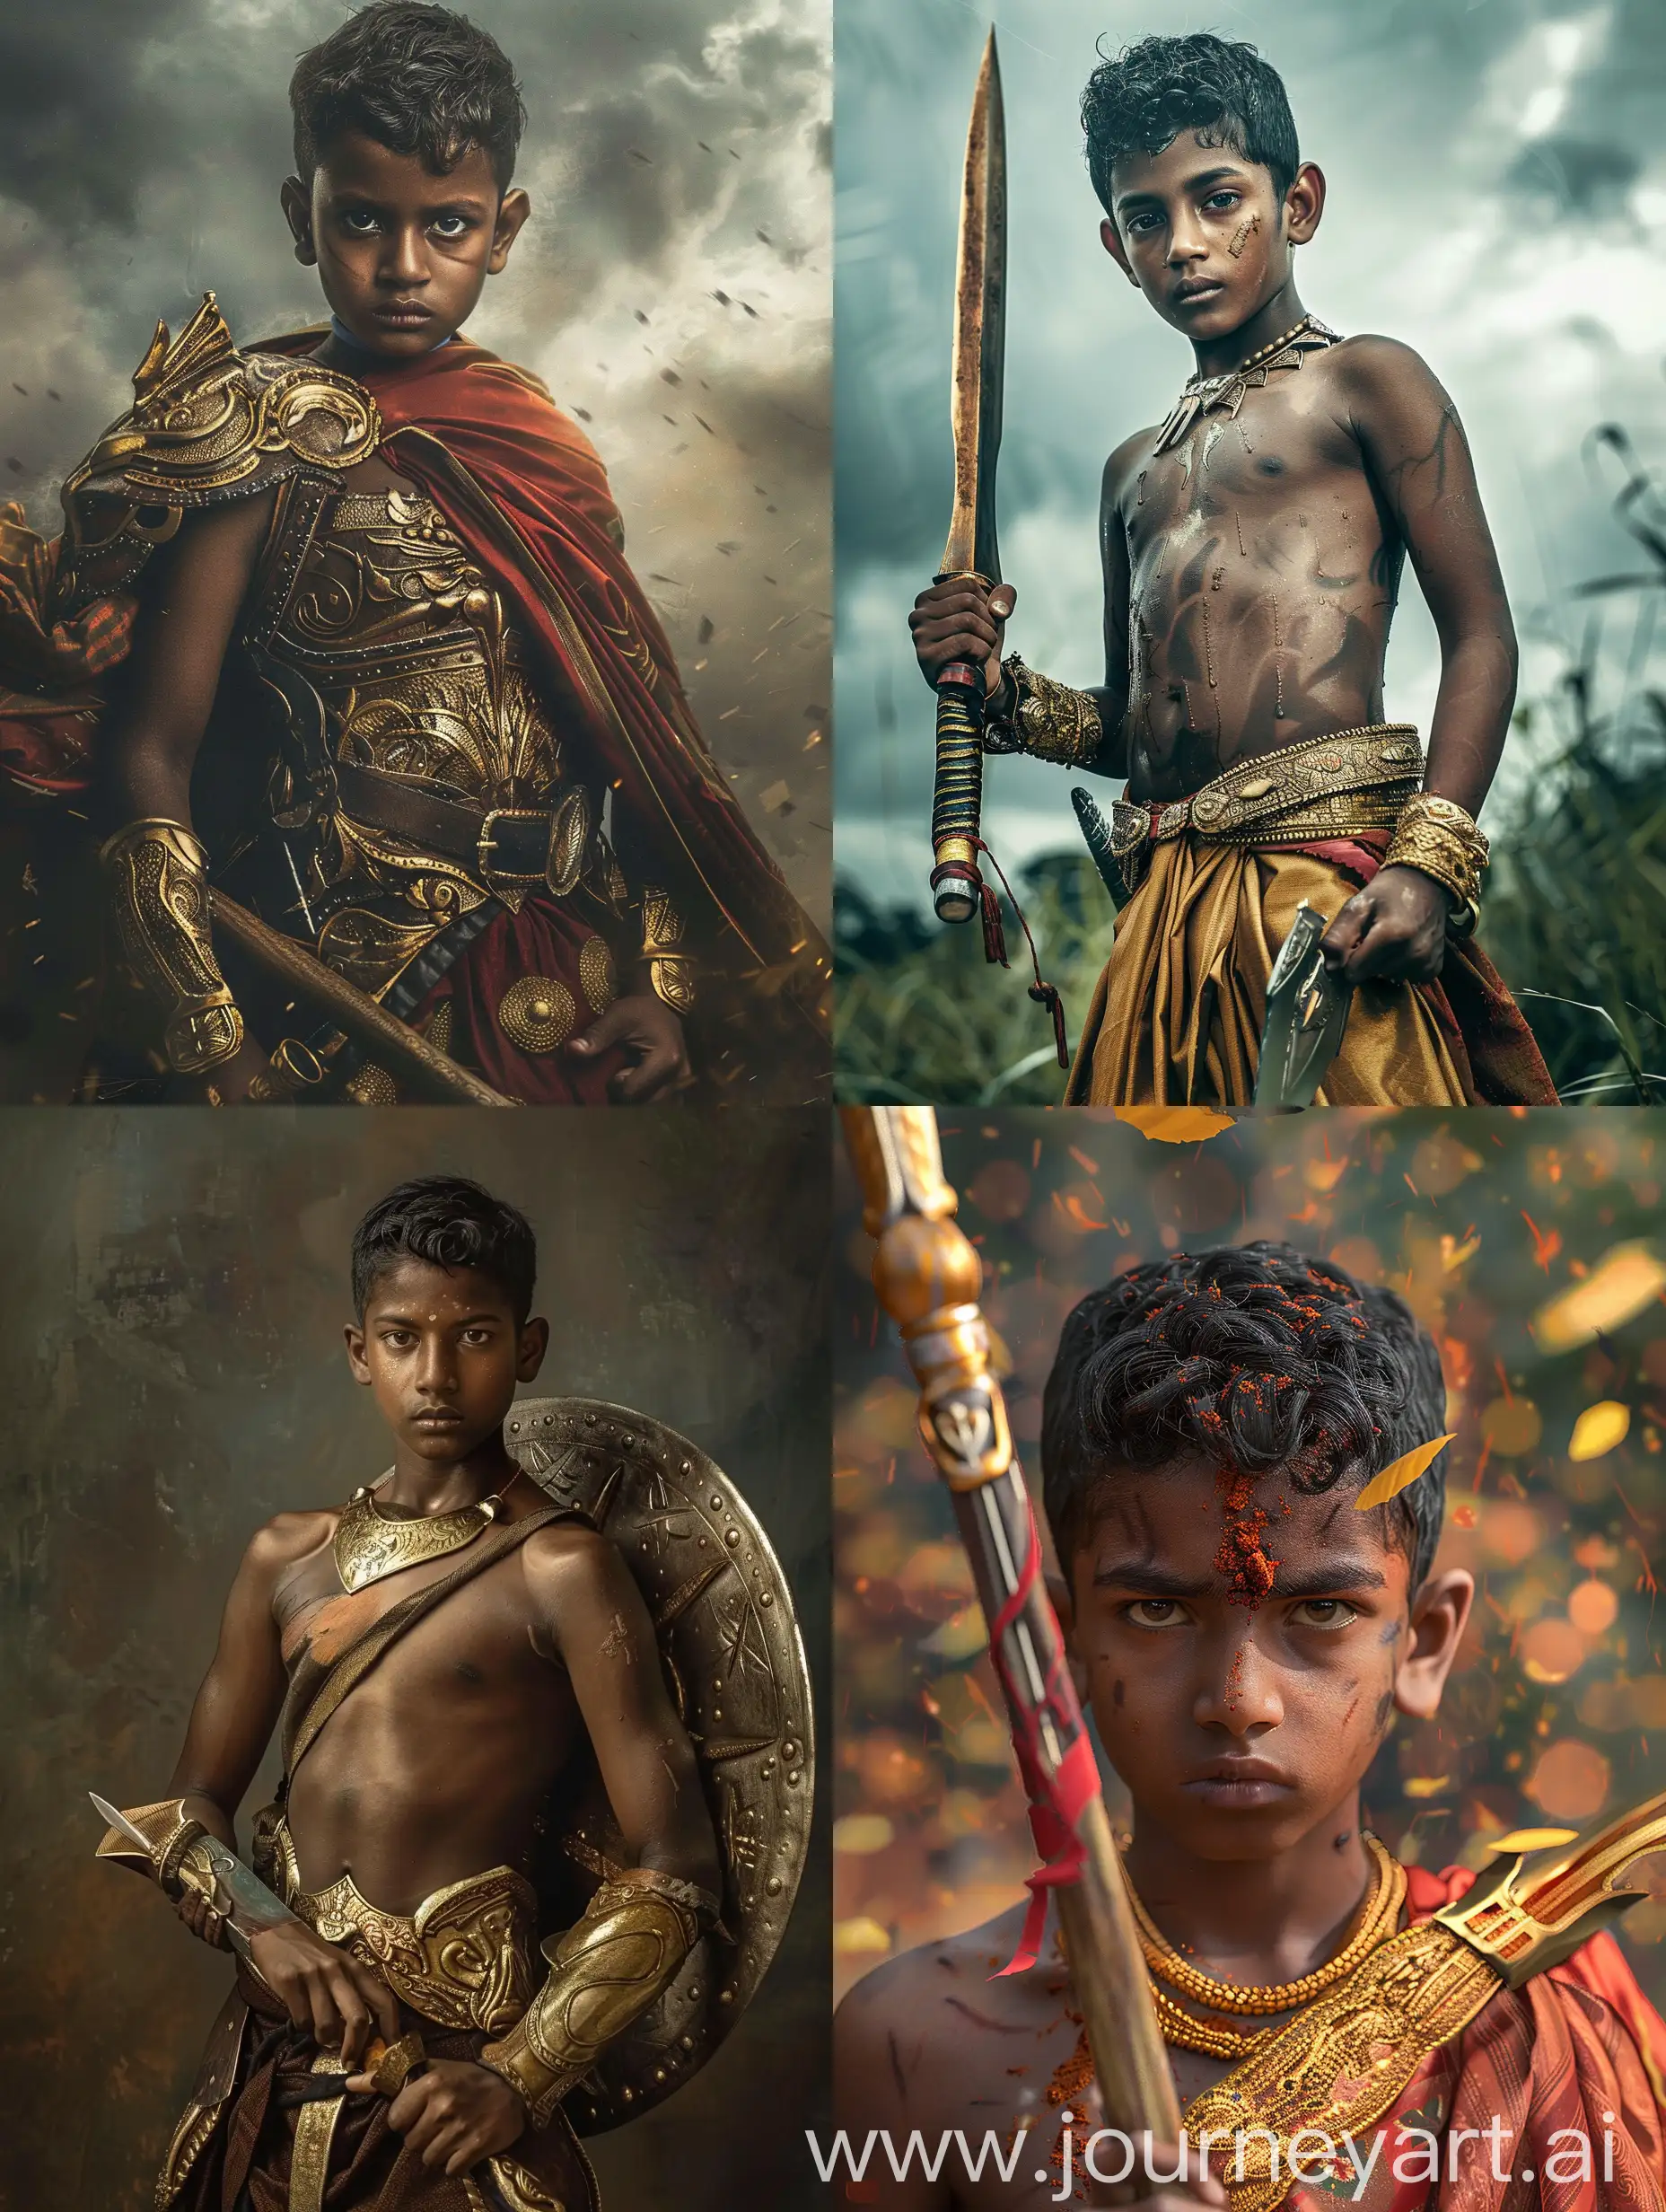 Western warrior a teenage boy became a superhero by ancient legend in sri lanka.with modern technology 